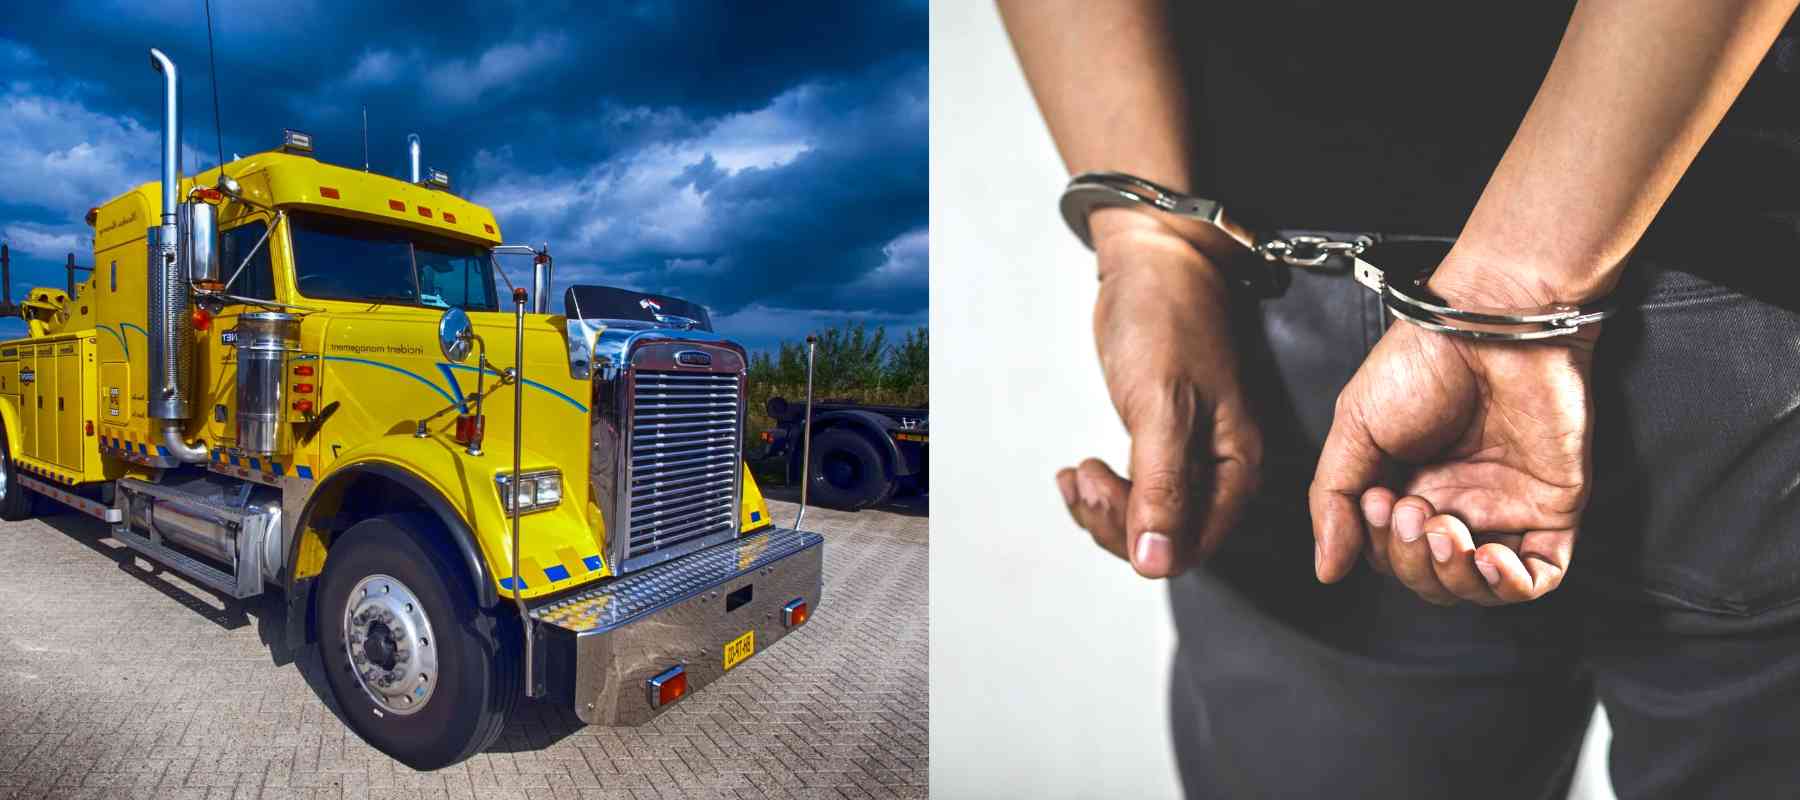 Criminal acts by truck drivers